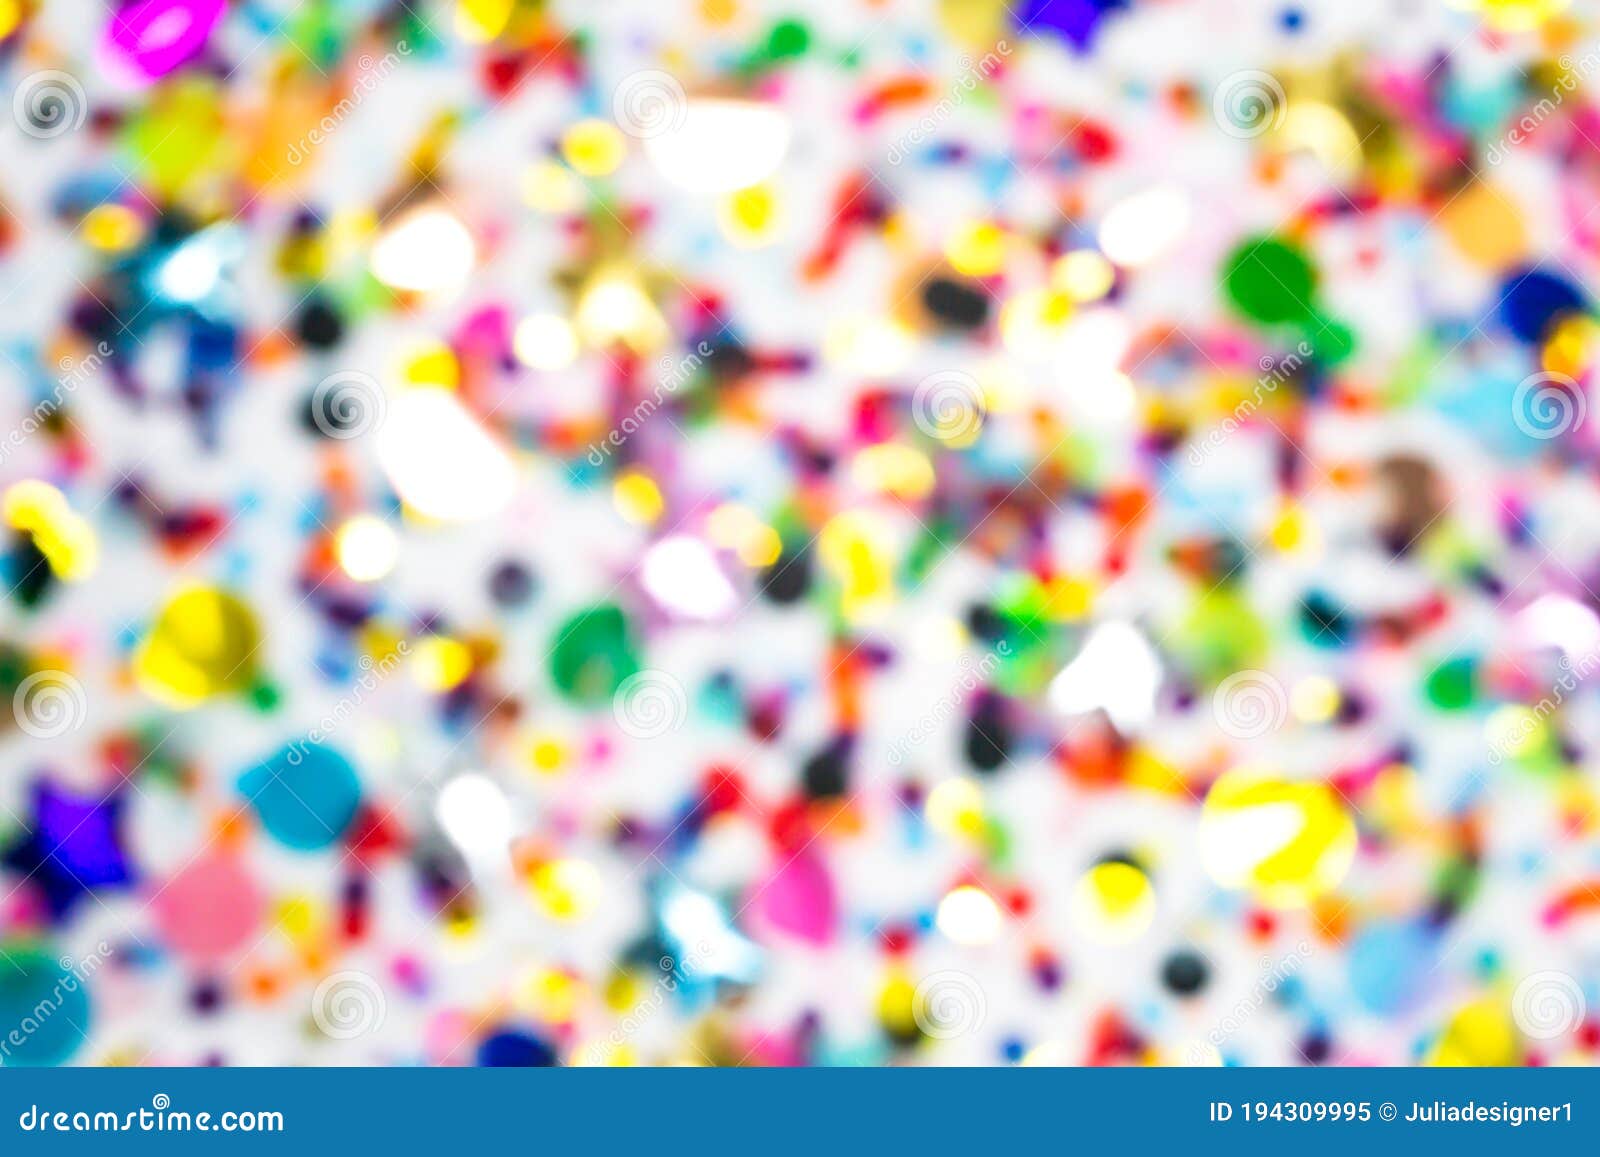 Colorful Confetti Defocused Blur Wallpaper. Holiday New Year, Birthday,  Wedding, Christmas Flat Lay Stock Image - Image of festive, gold: 194309995